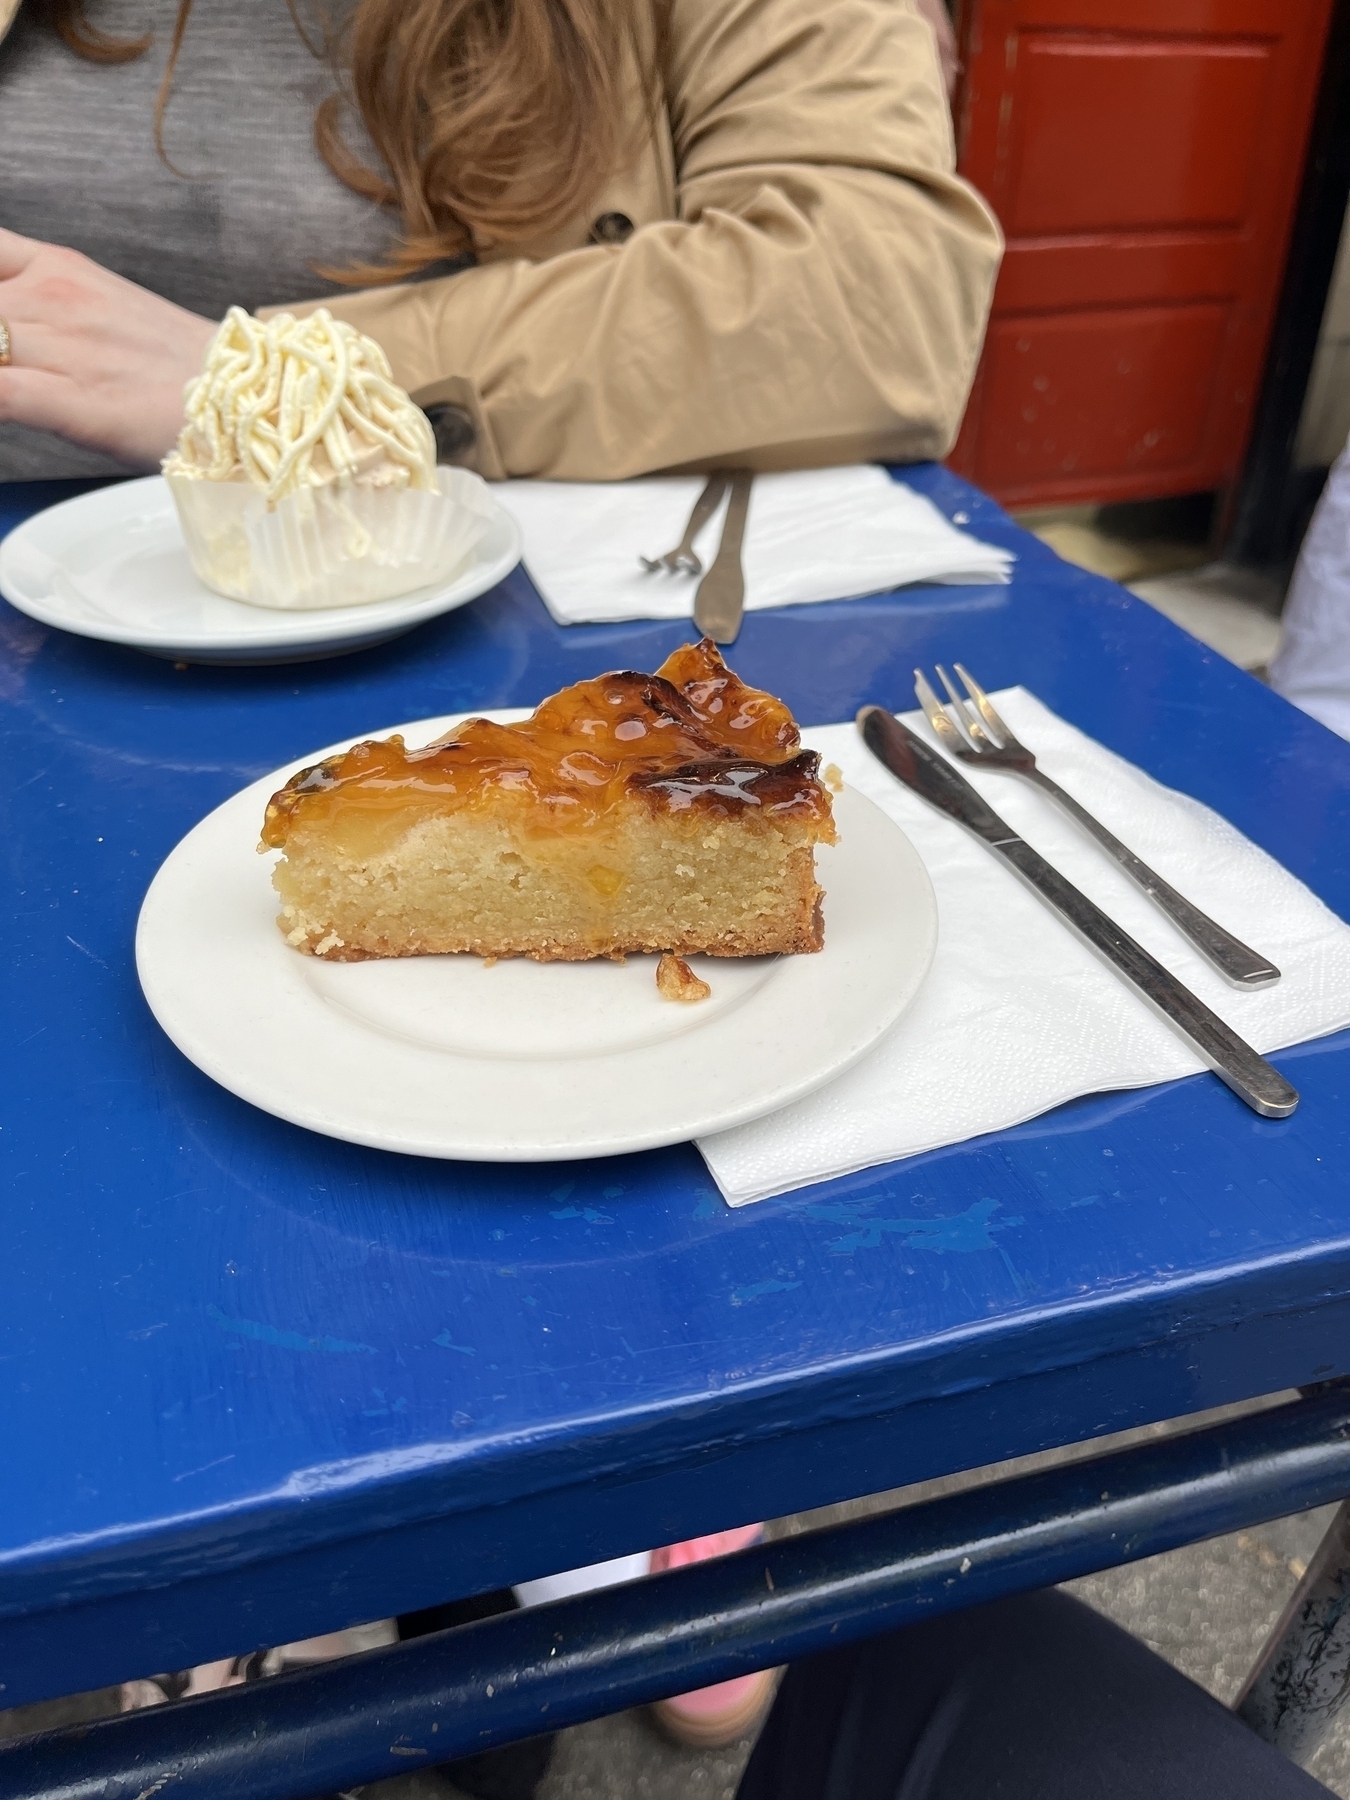 Triangle slice of Cake with almonds on top on a plate and blue bright table with knife and fork next to it.